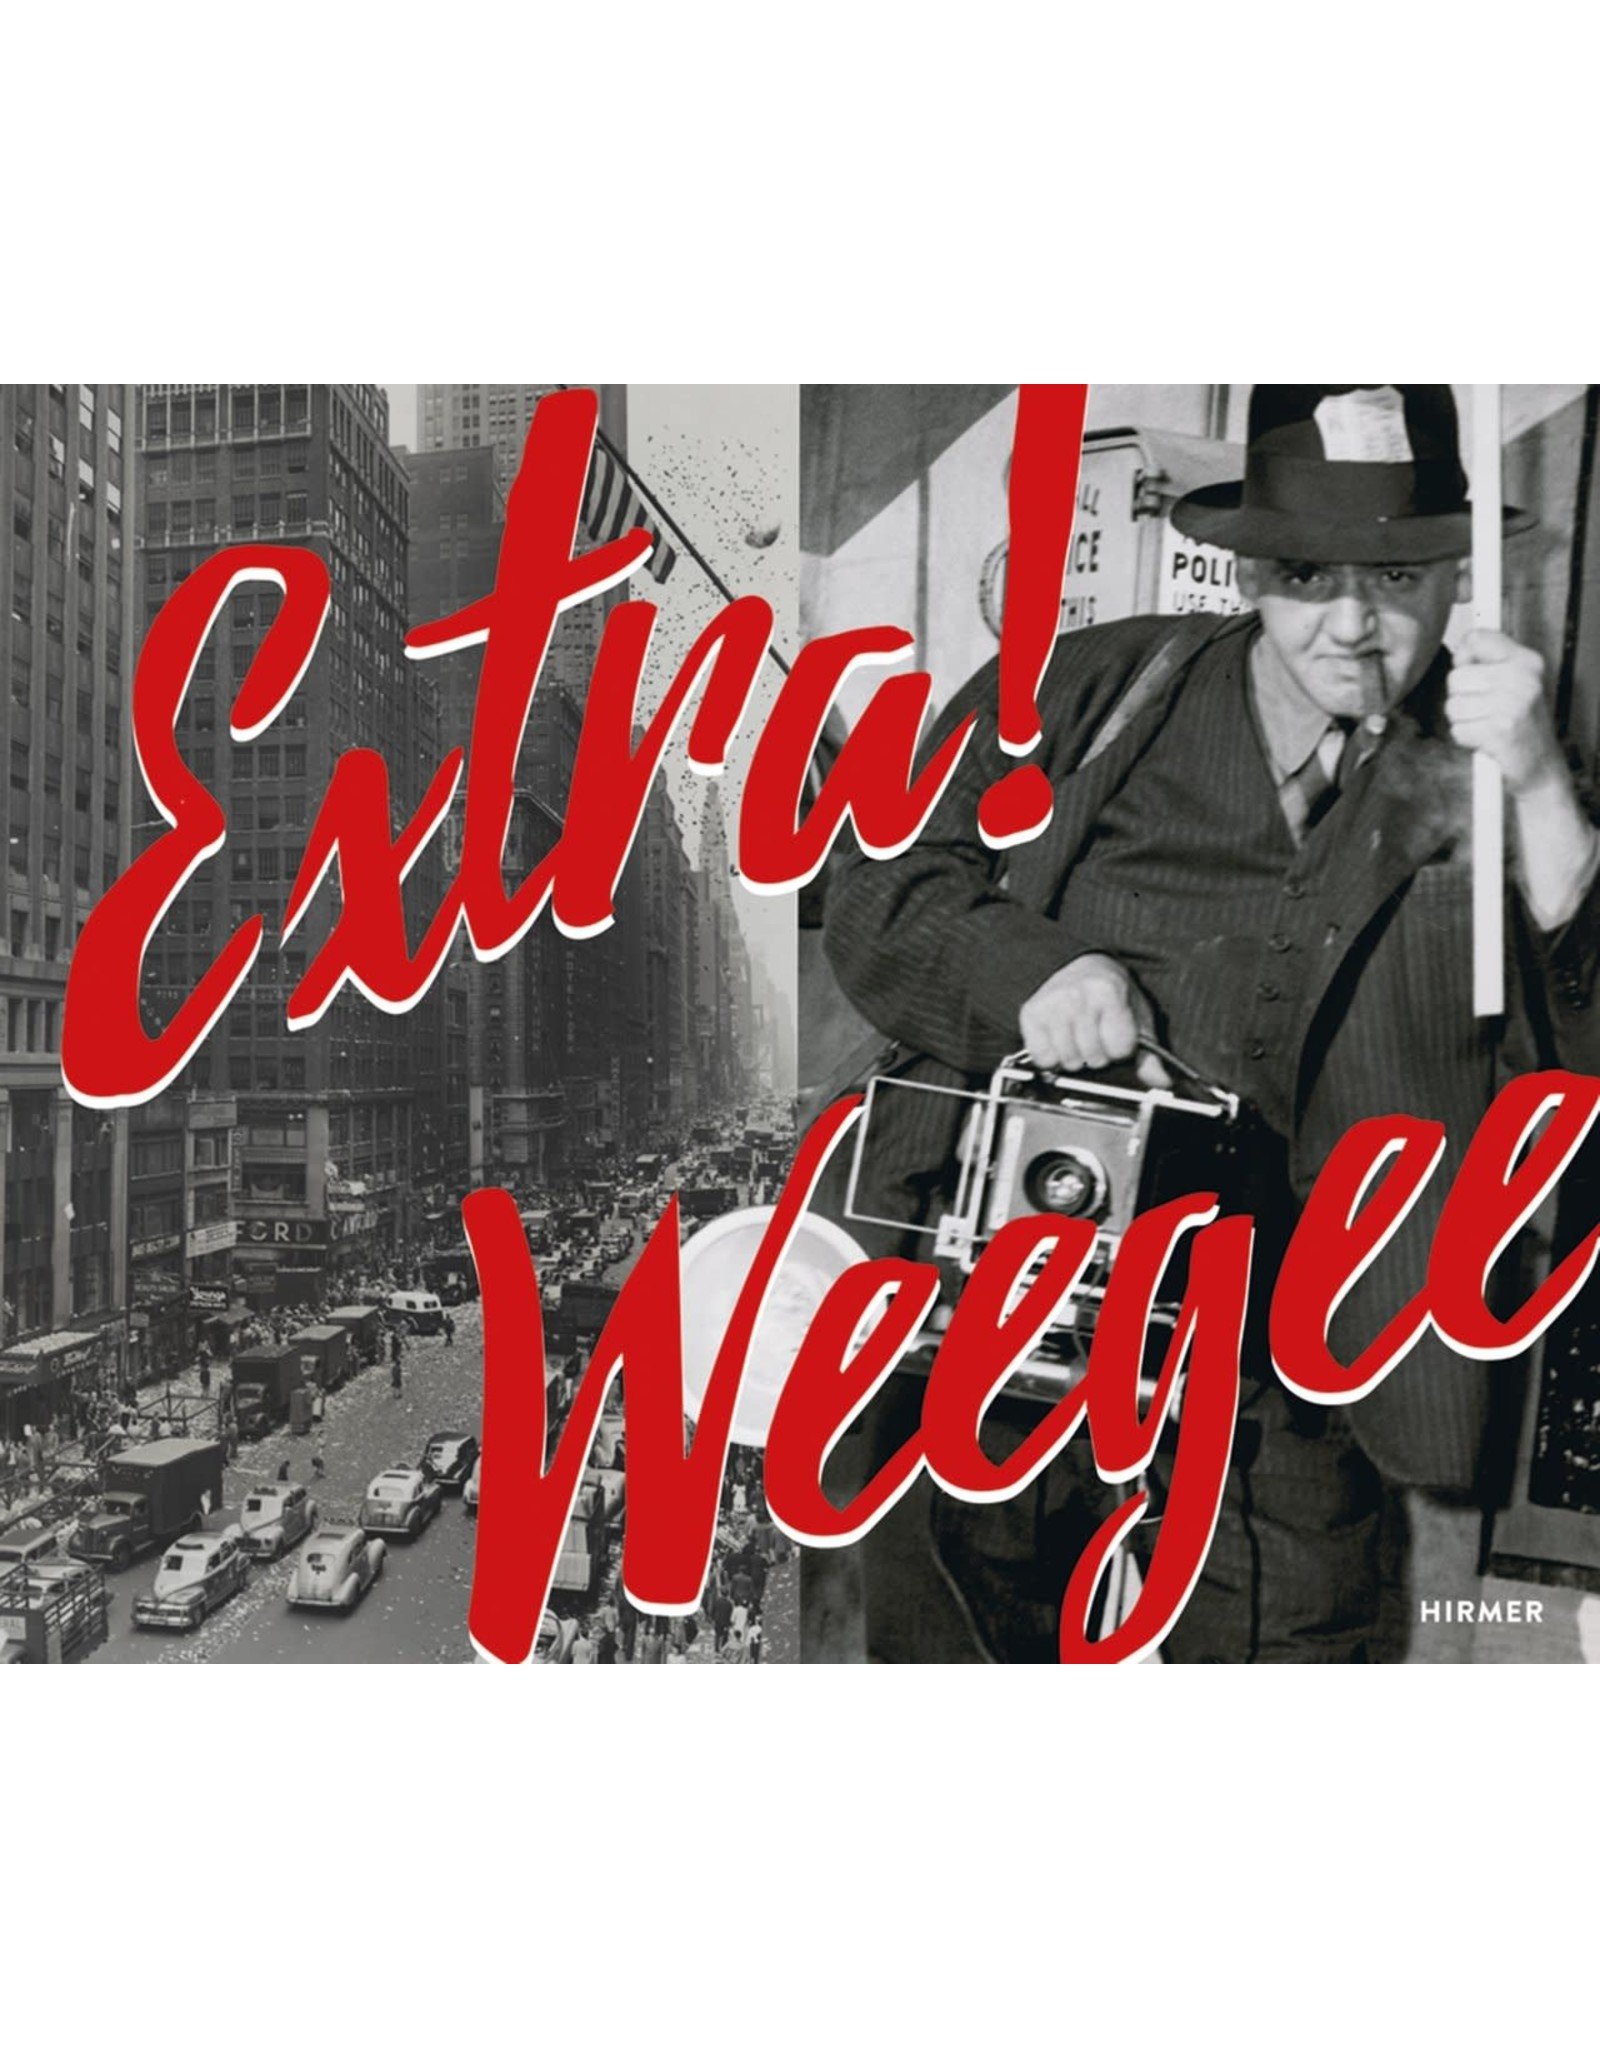 Extra! Weegee